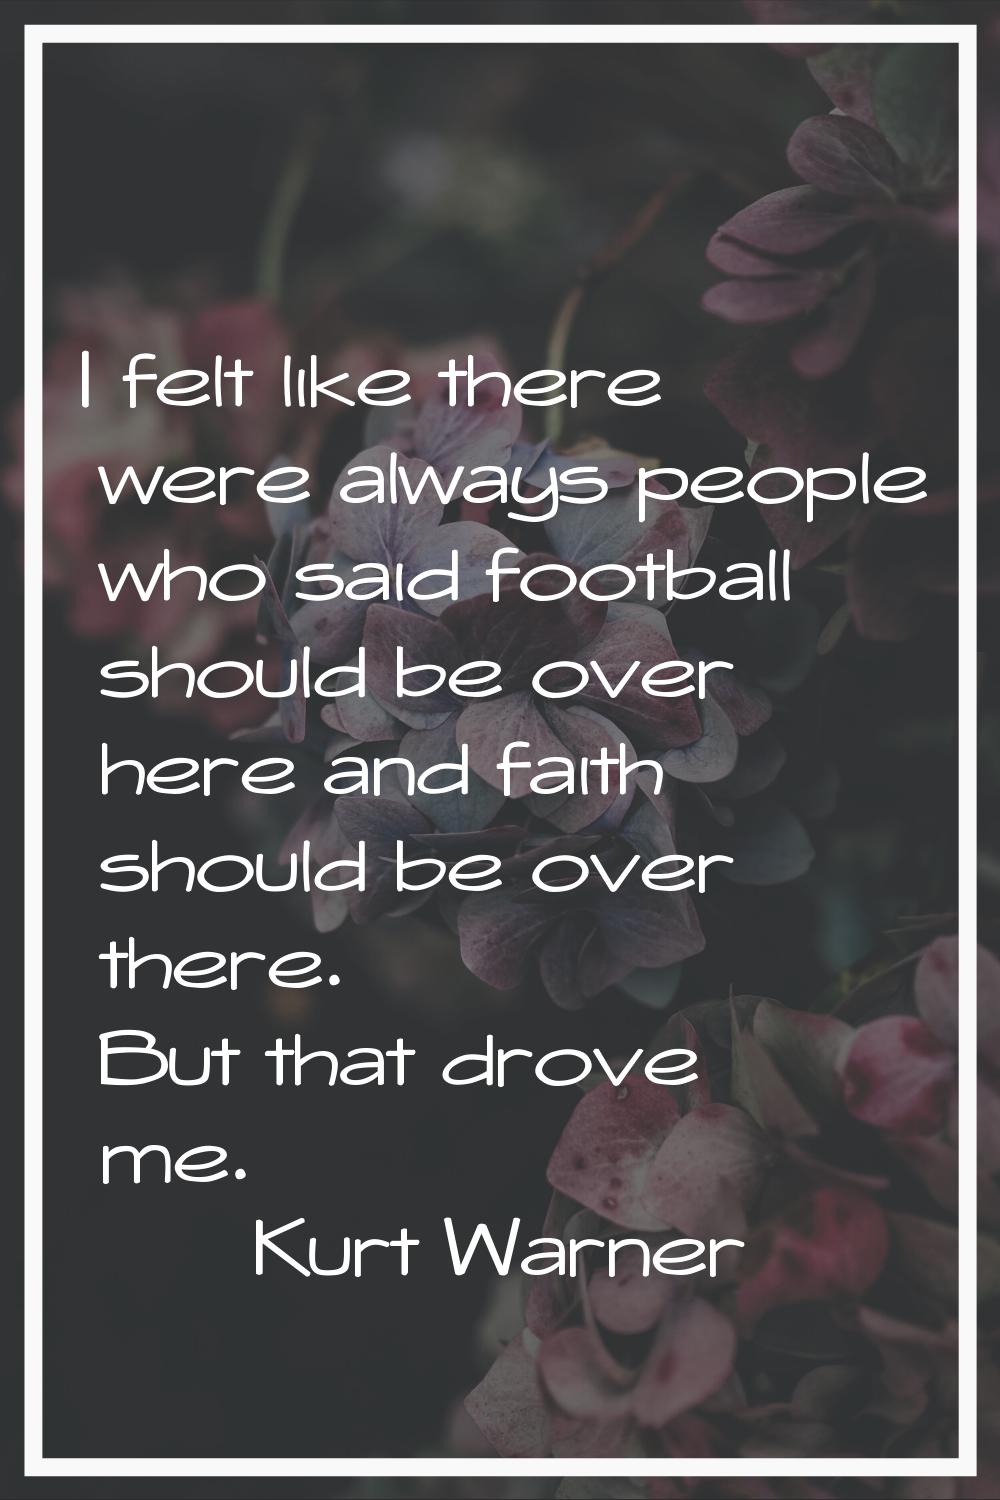 I felt like there were always people who said football should be over here and faith should be over